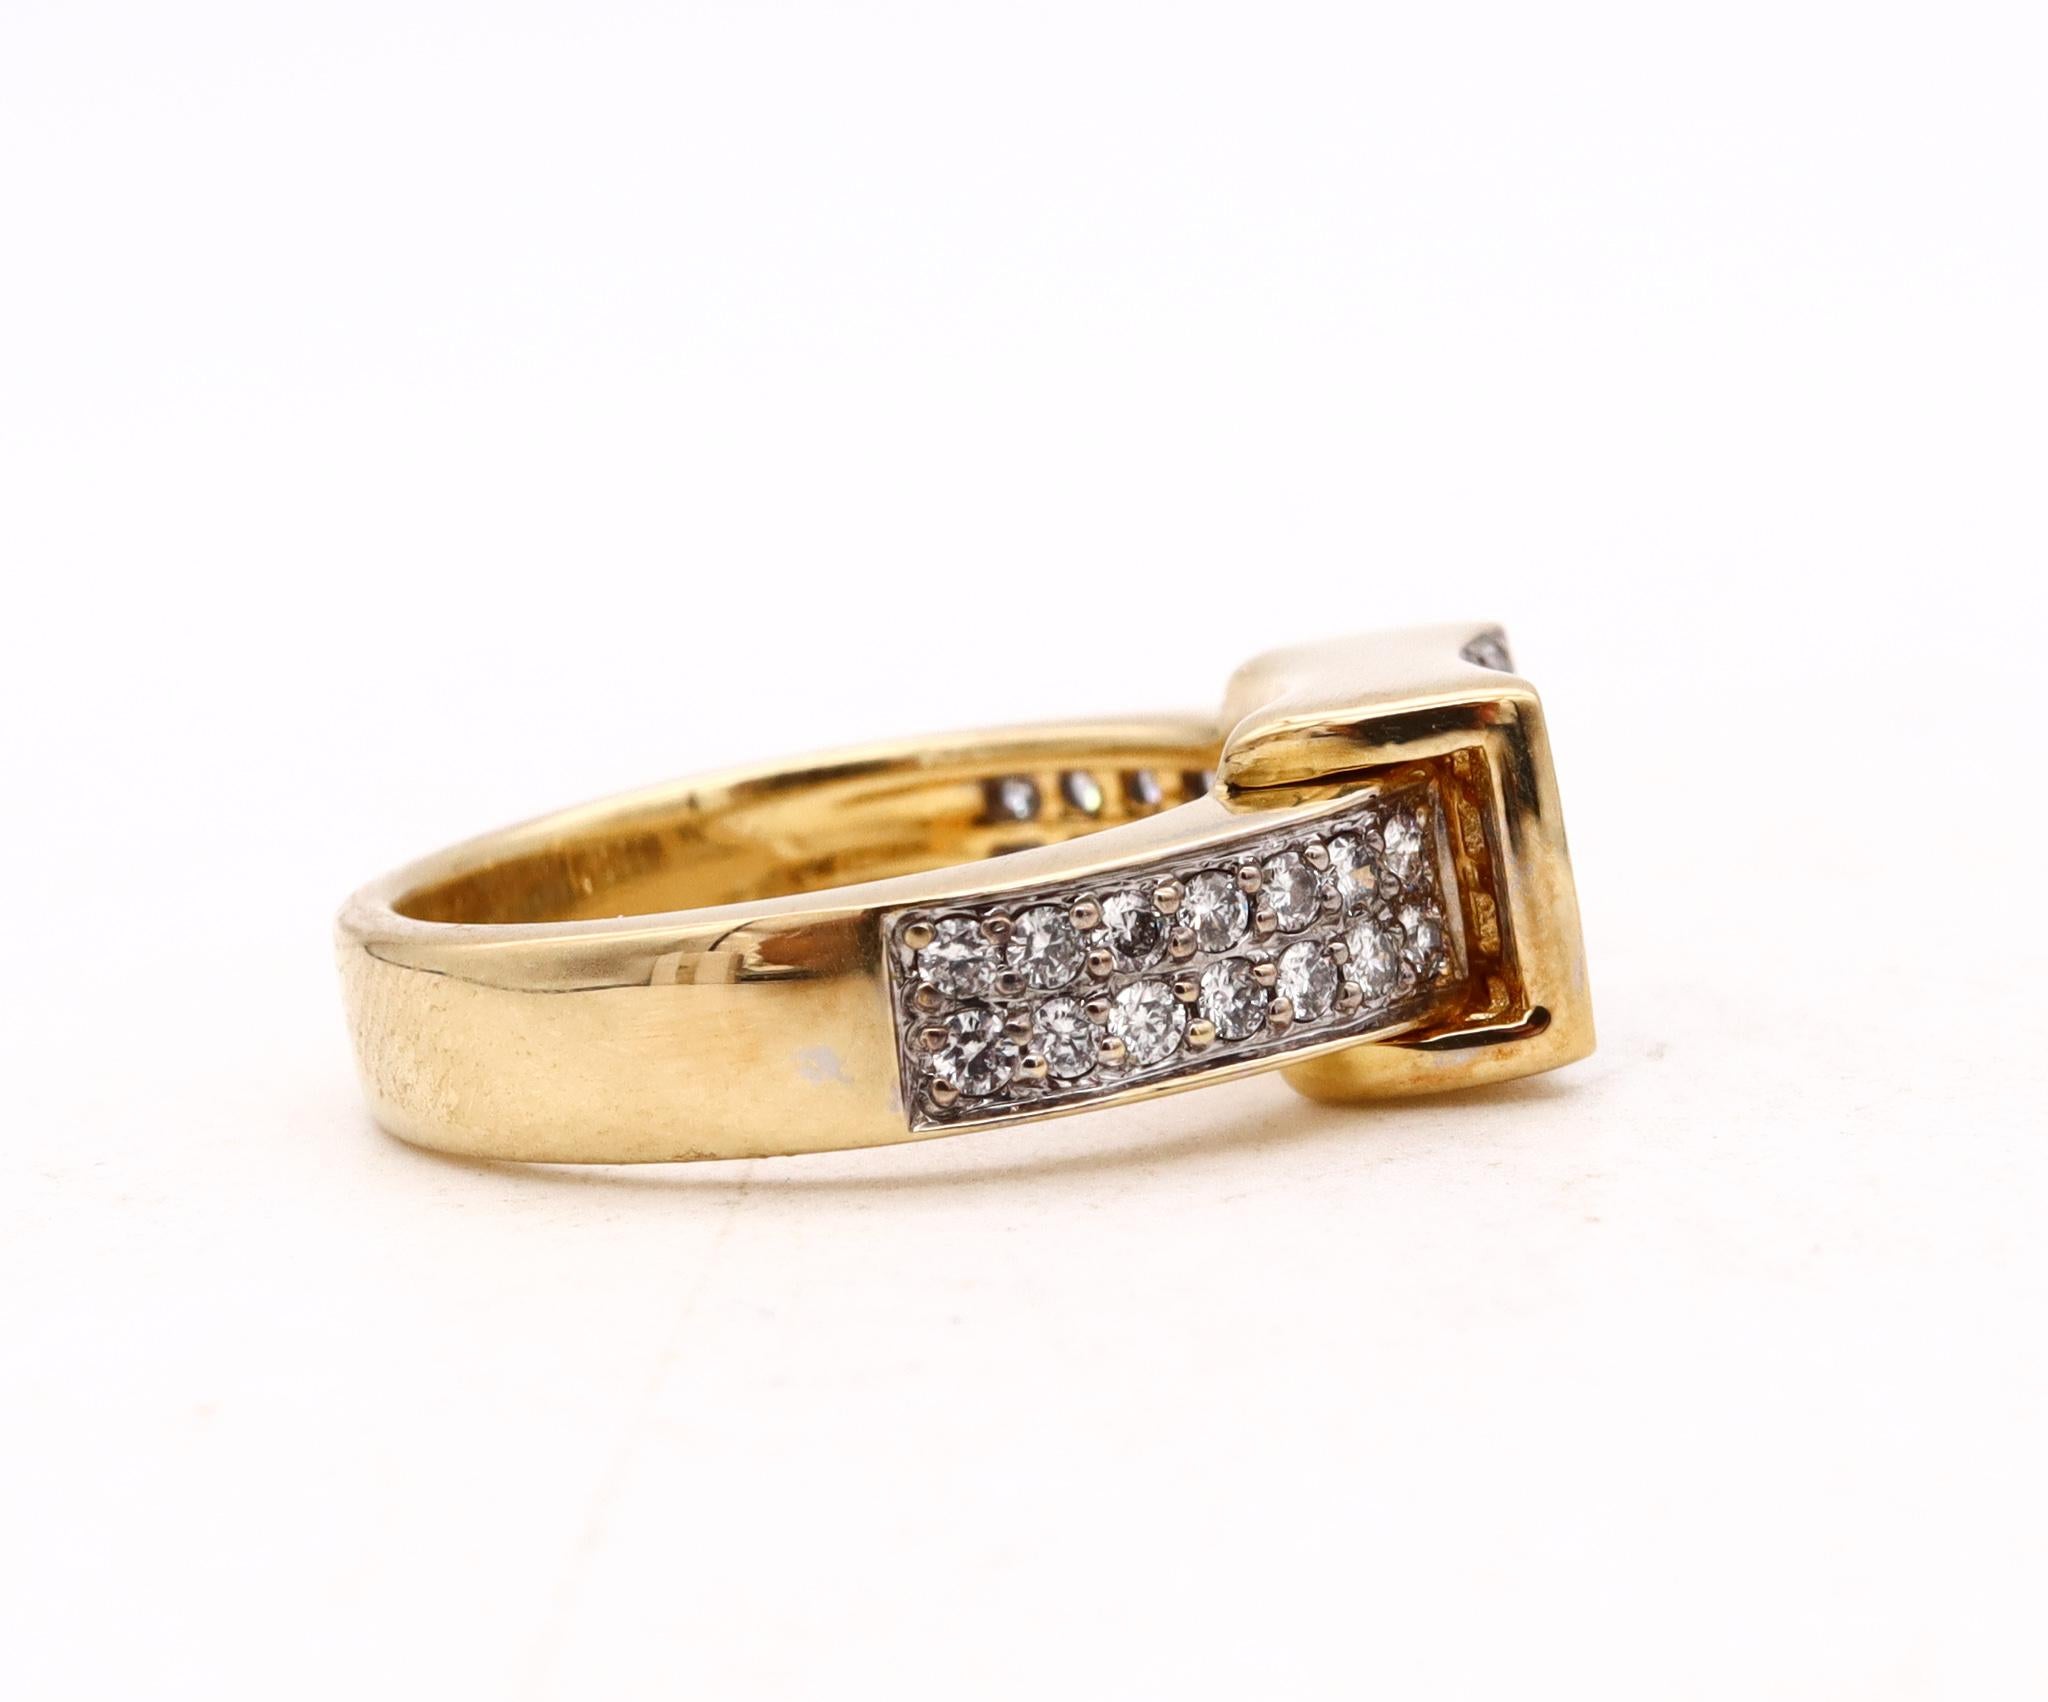 Italian Modernist Geometric Ring in 18Kt Yellow Gold with 1.04 Cts VS Diamonds For Sale 2